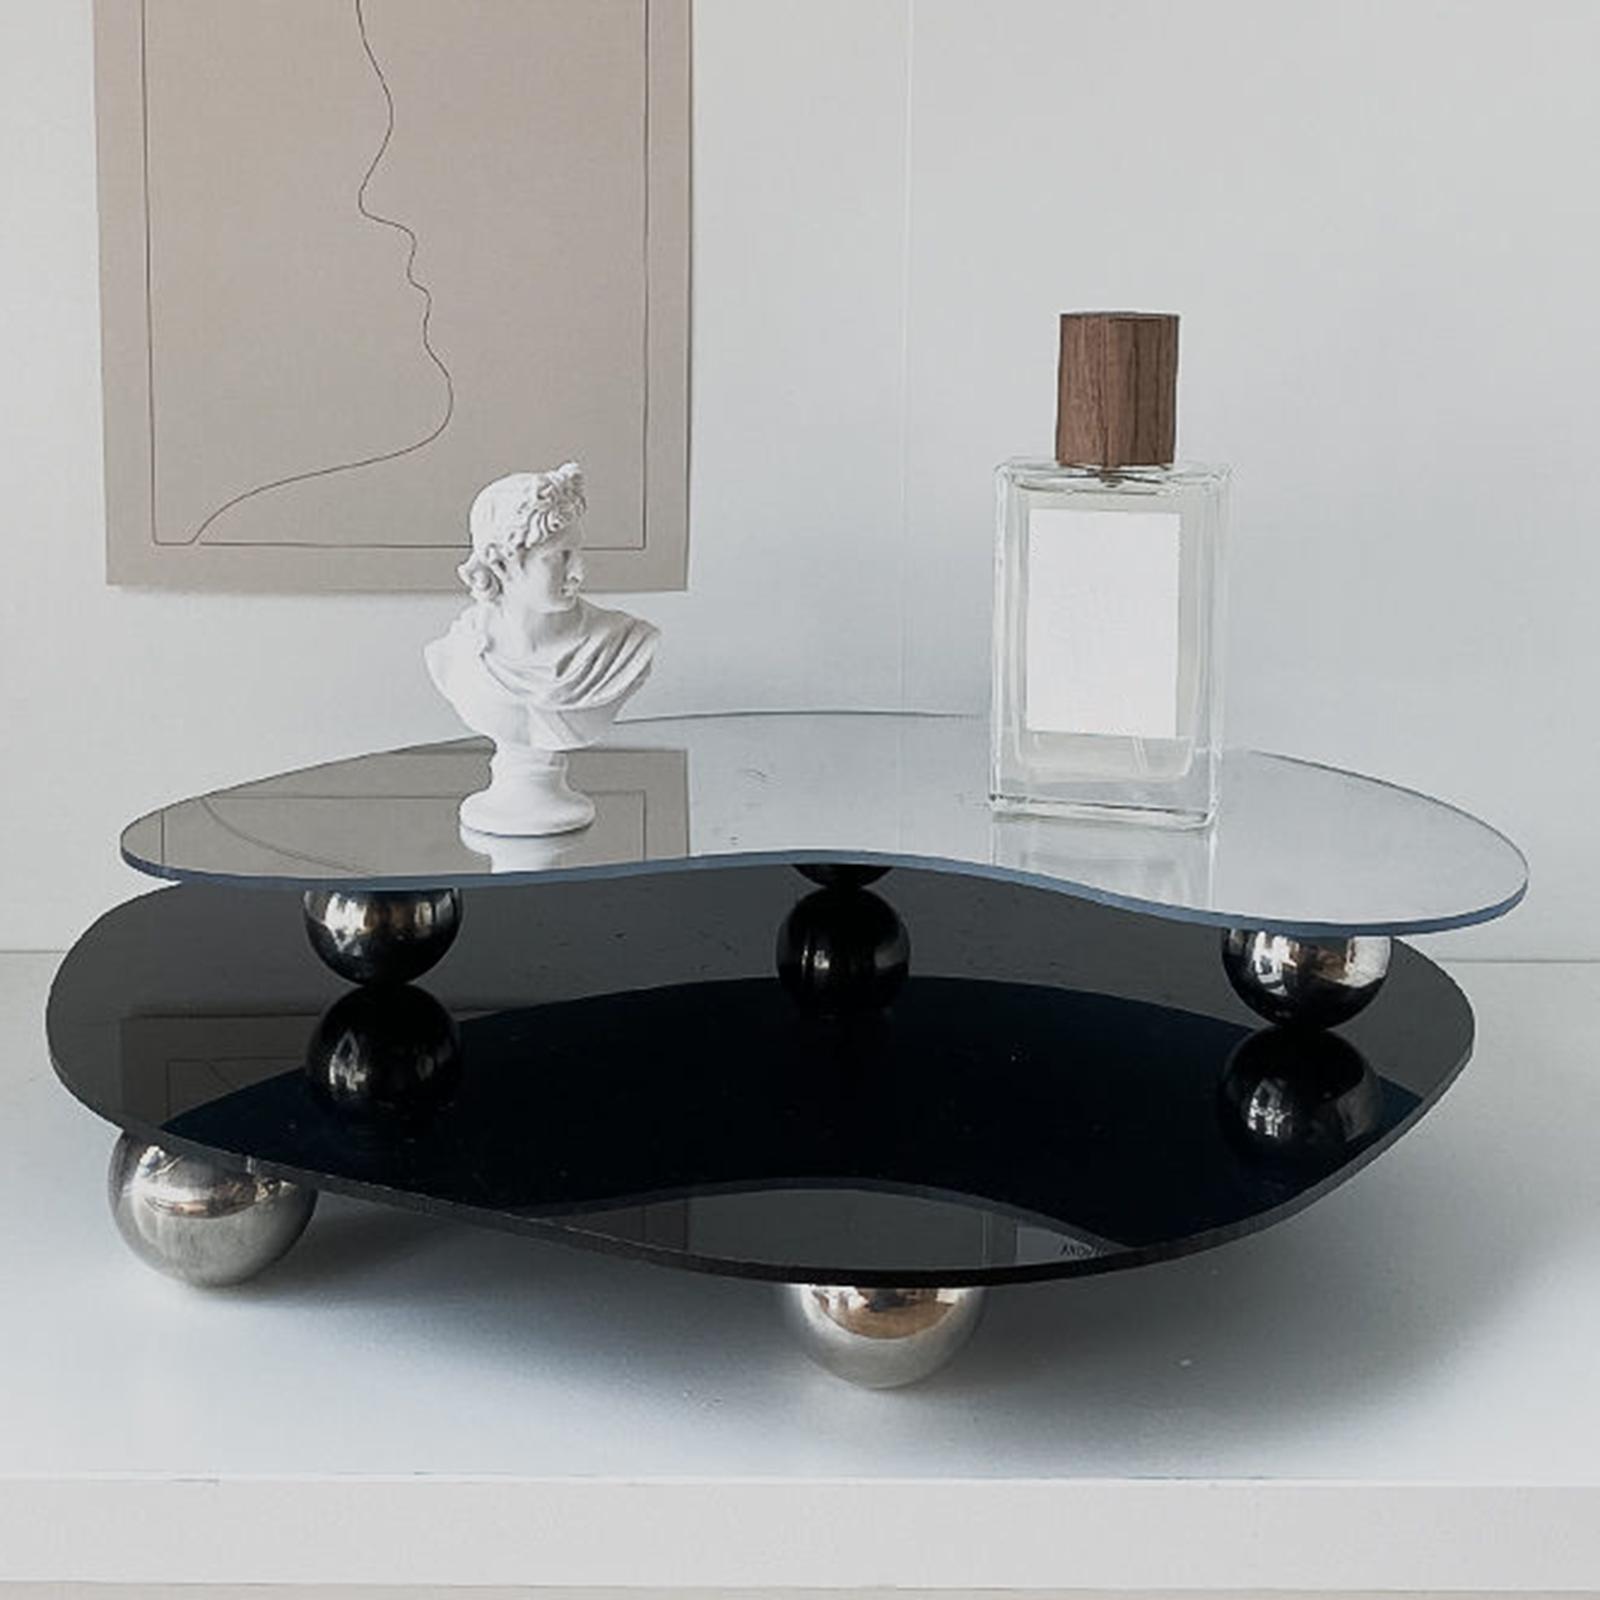 Display Vanity Tray Perfume Plate Serving Tray for Bedroom Background Home 29x25x4cm Black